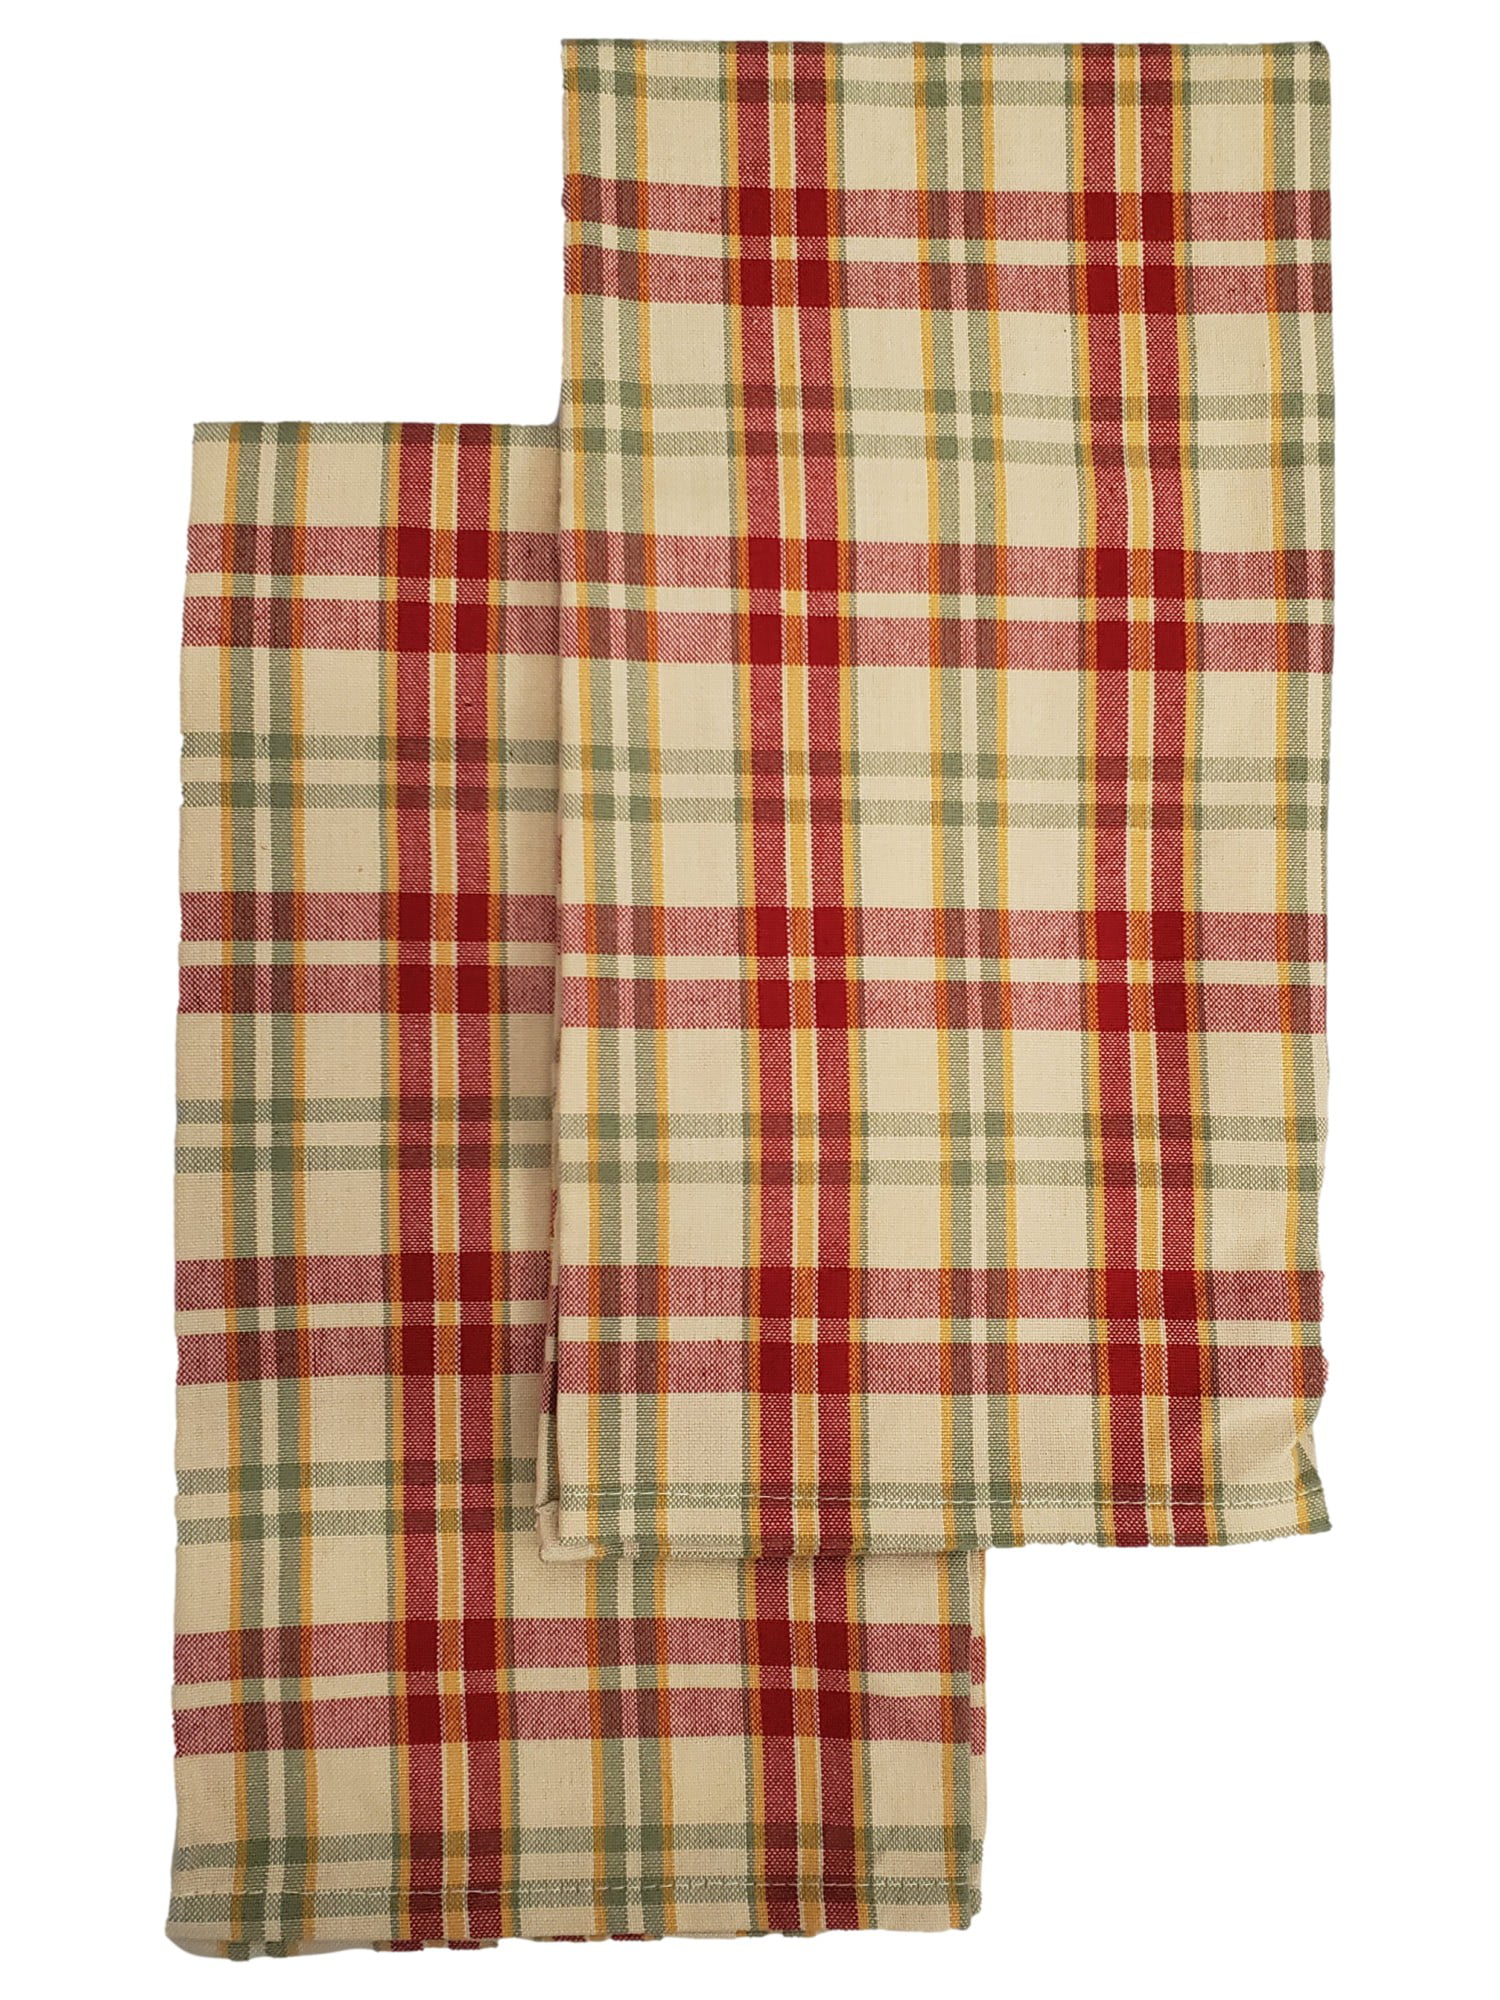 Yellow Plaid Dish Towel with Fringe + Reviews